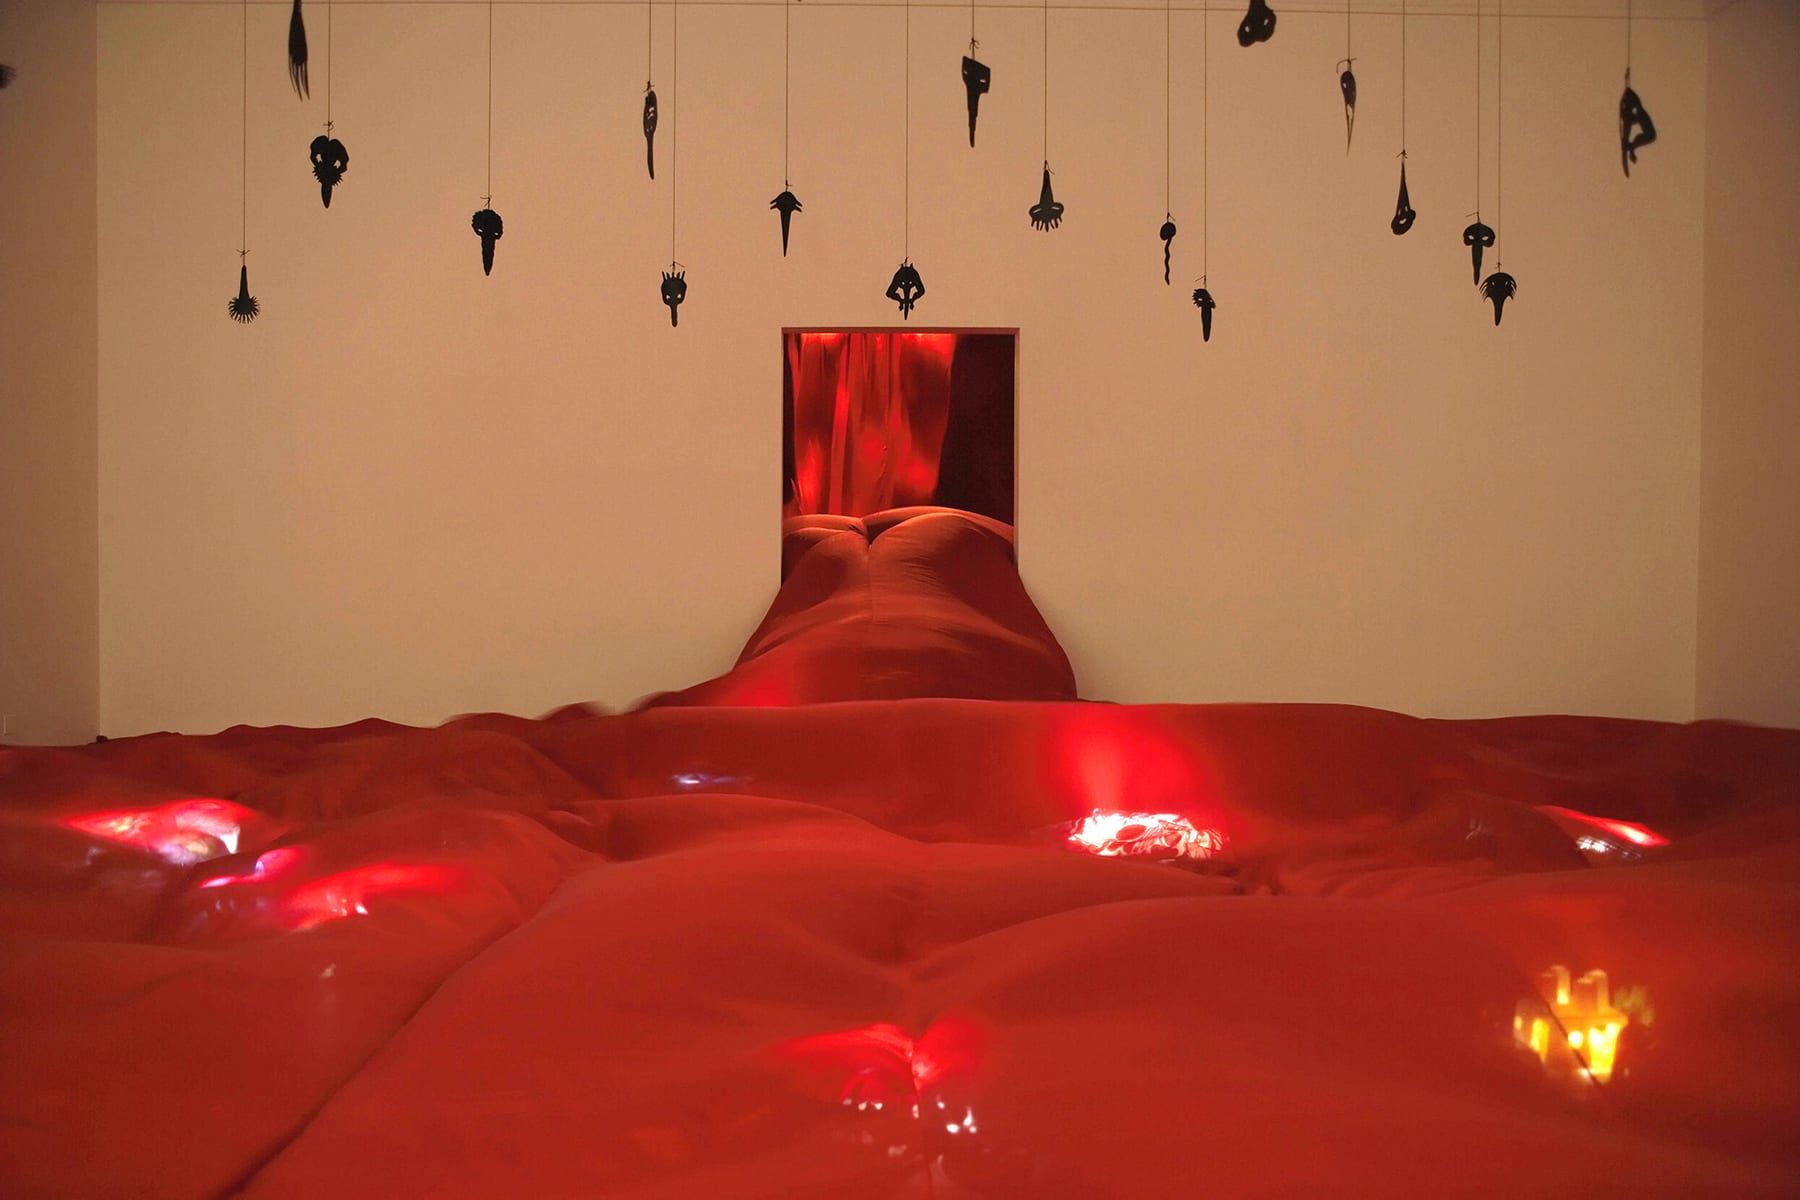 small black sculptures by Annette Messager hanging in a room with a red velvet bed